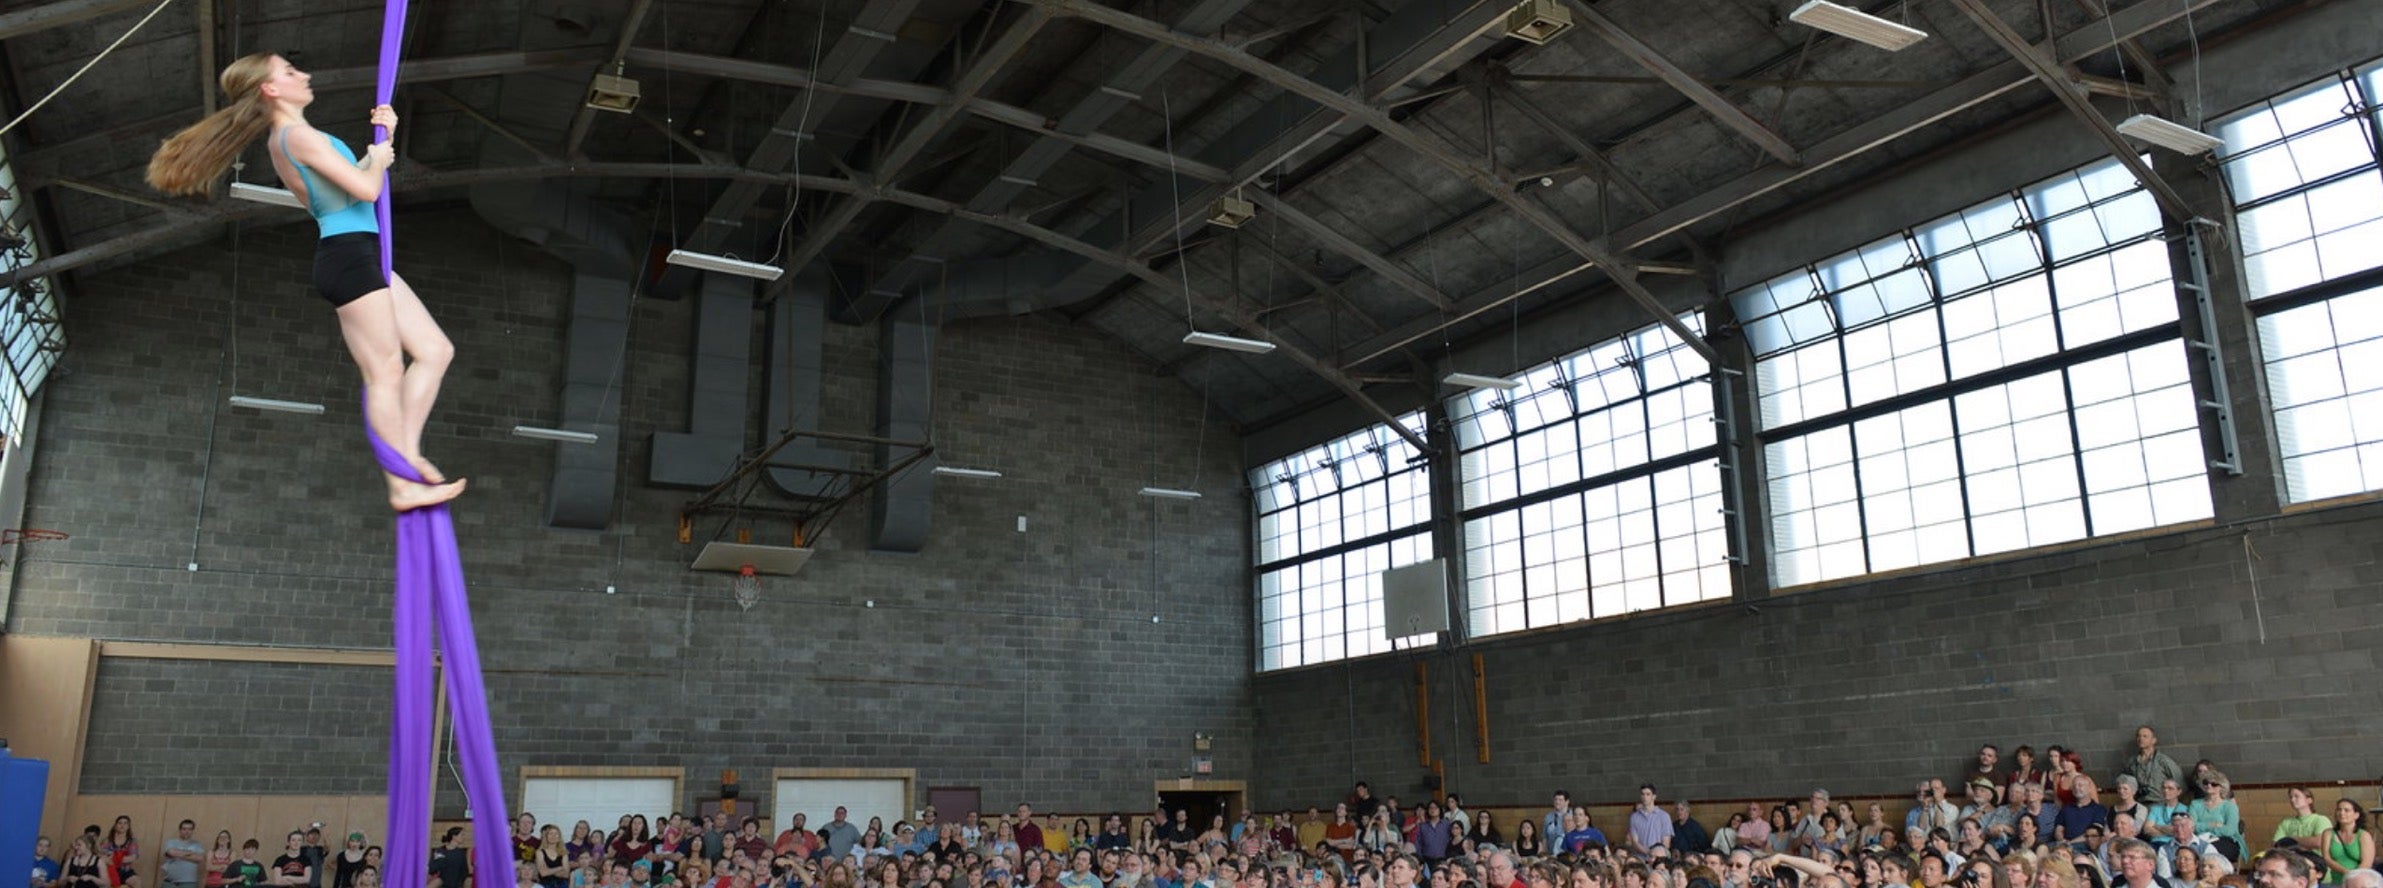 With an audience looking on, an acrobat climbs an aerial silk suspended from the rafters of a gymnasium.